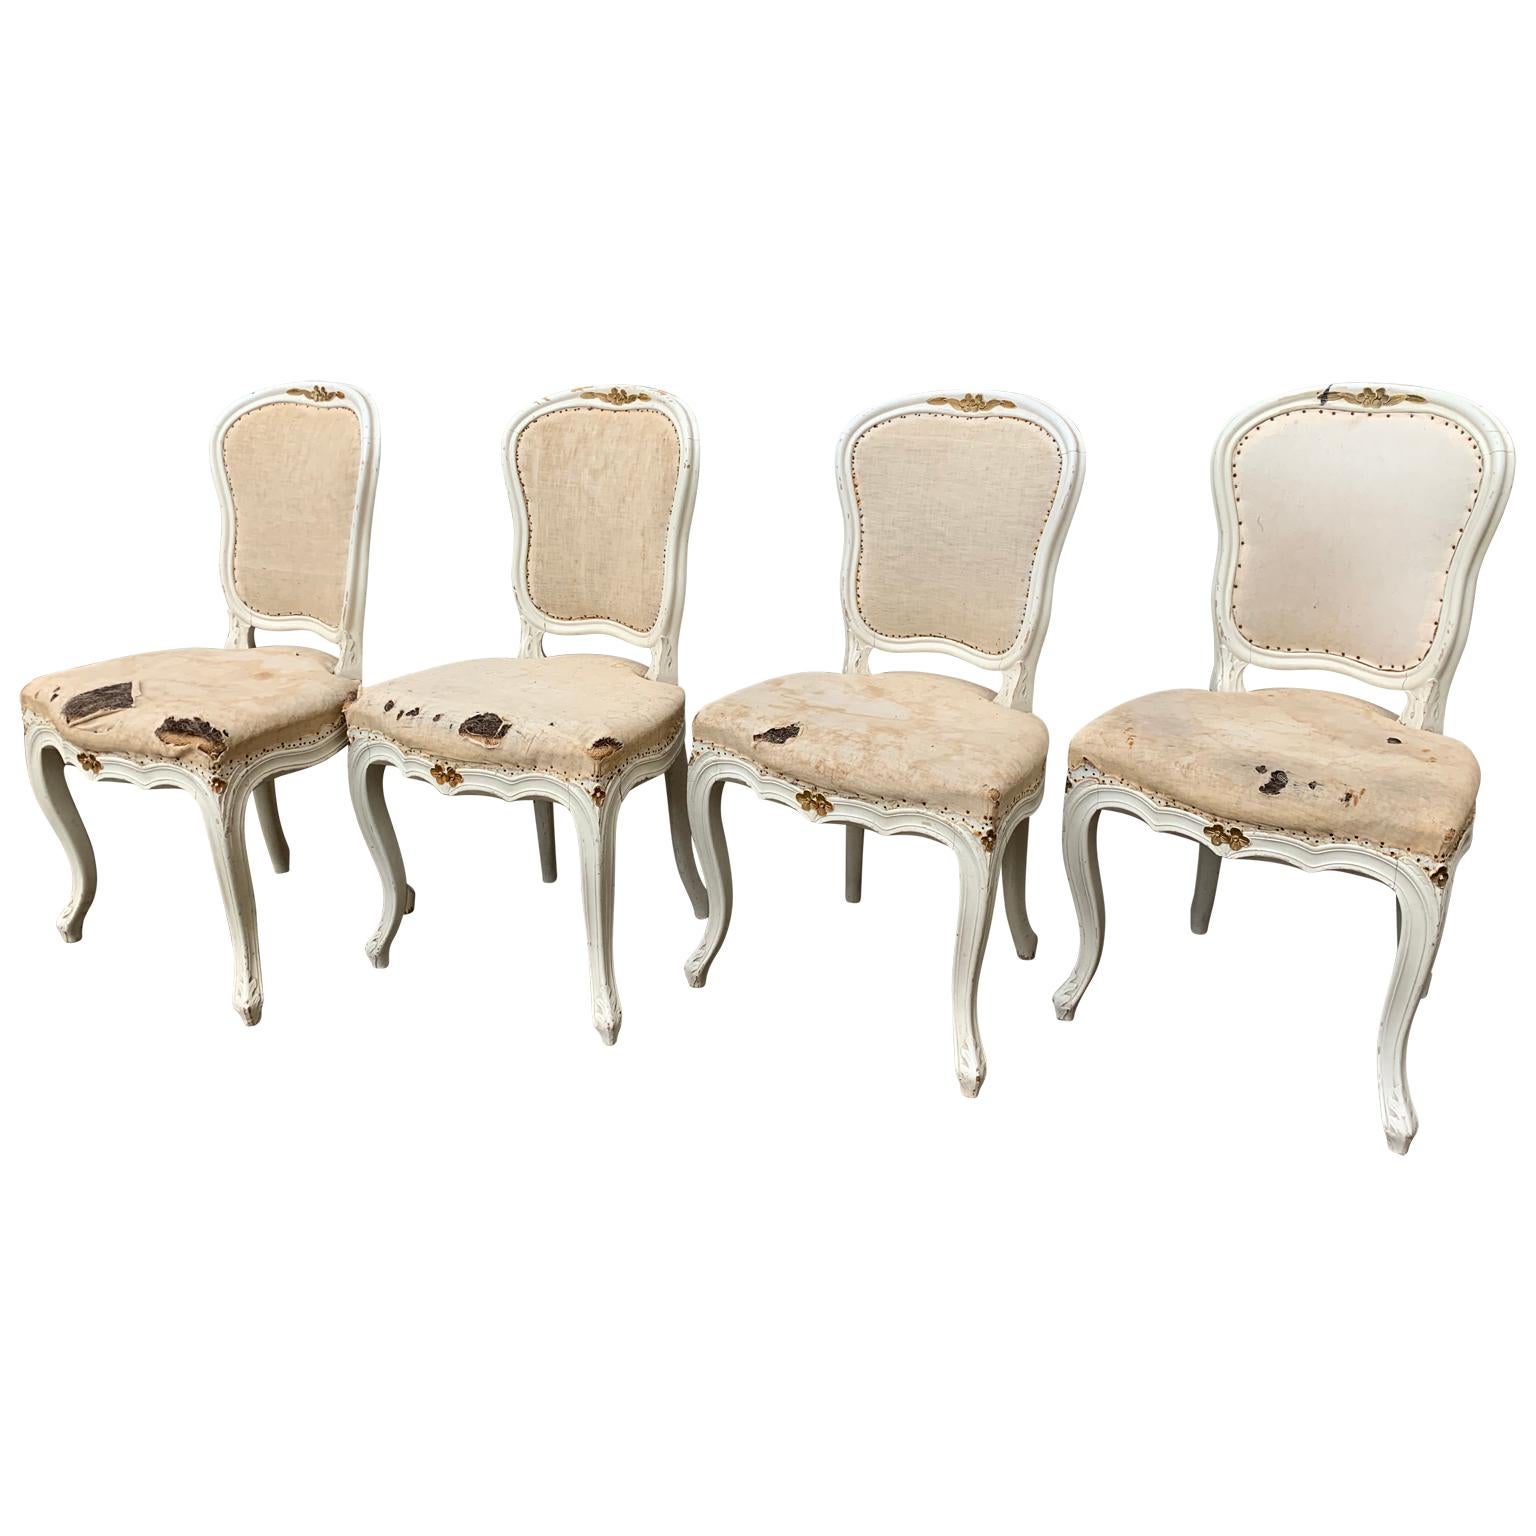 Set of 4 Swedish White Painted 19th Century Rococo Style Chairs 1